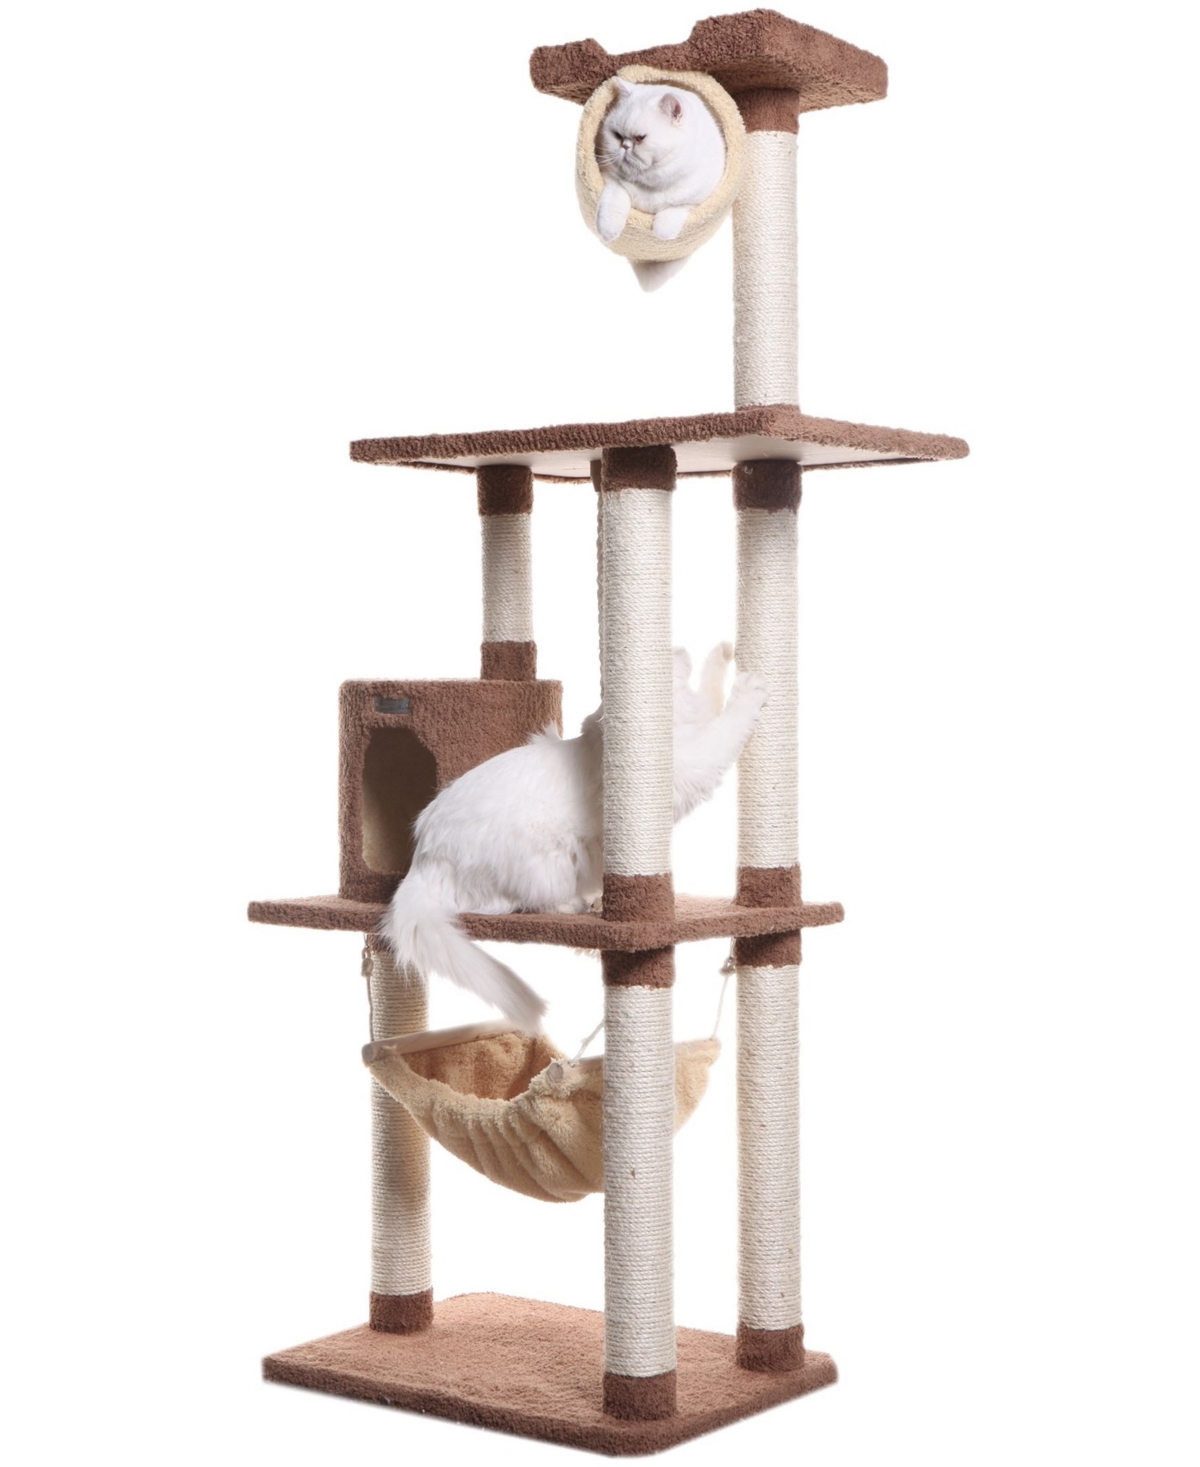 70" Real Wood Cat Tree With Scratch Posts & Hammock - Tan